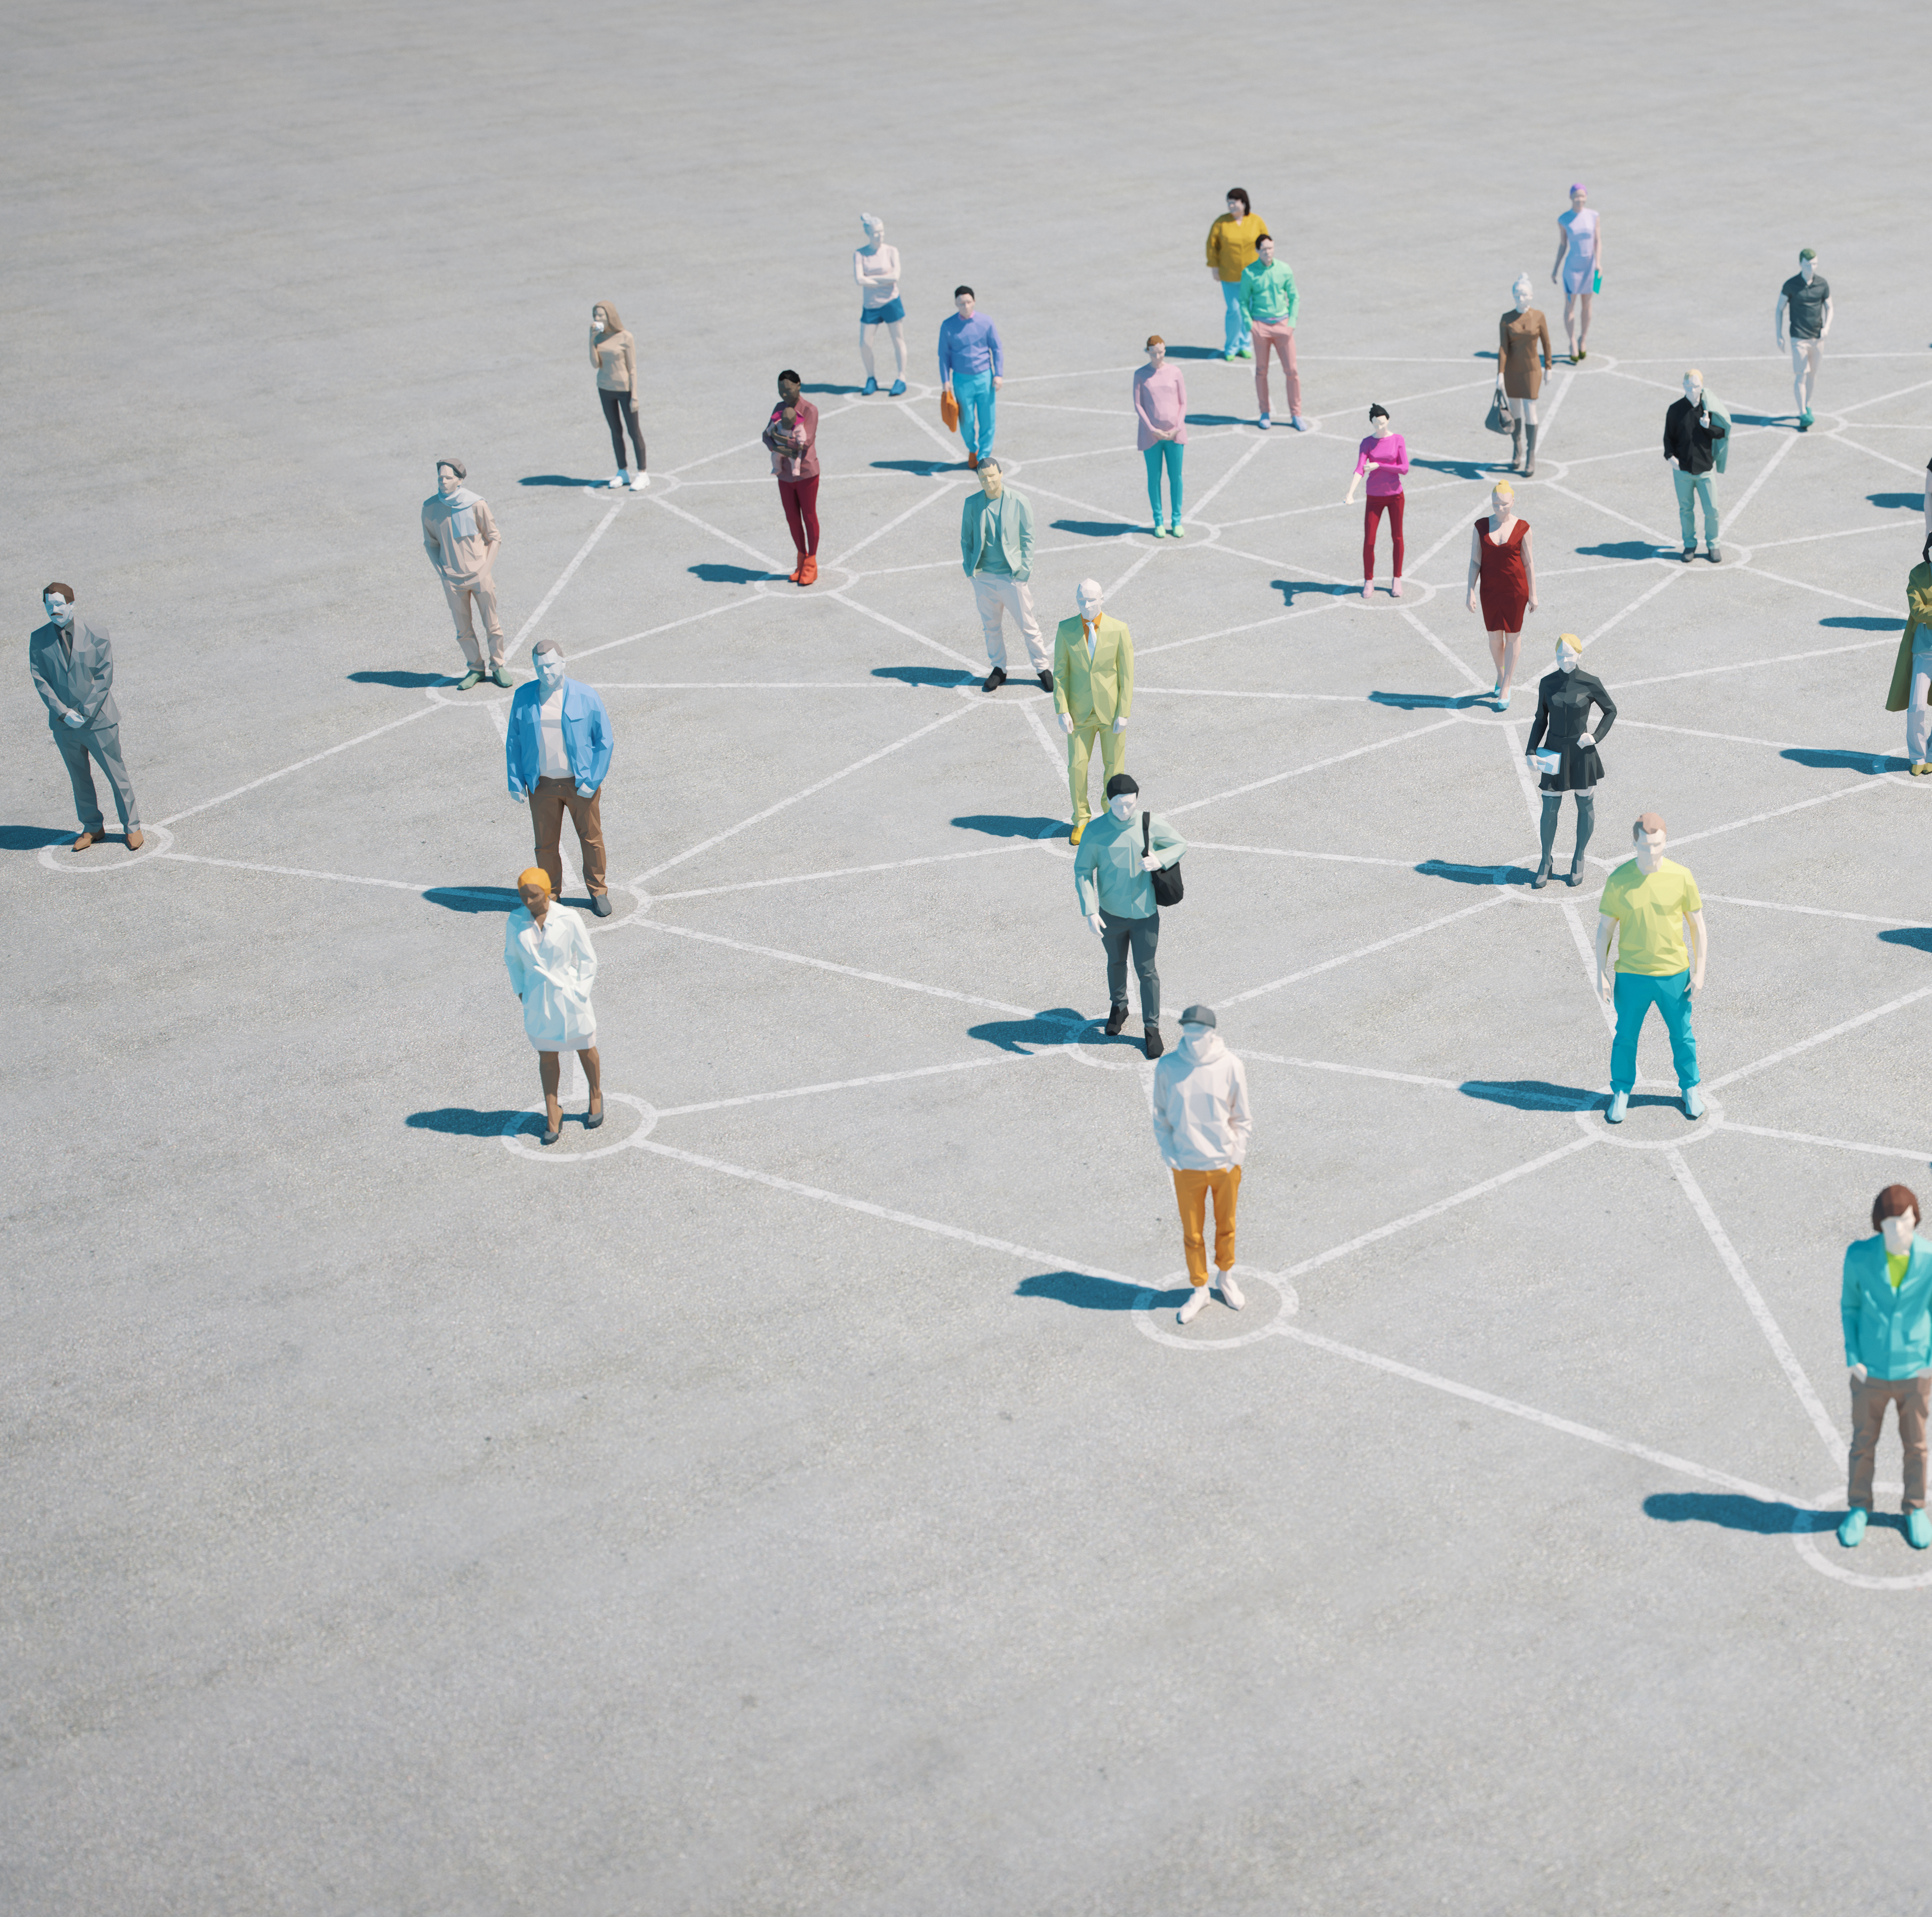 3d image of people in a virtual network